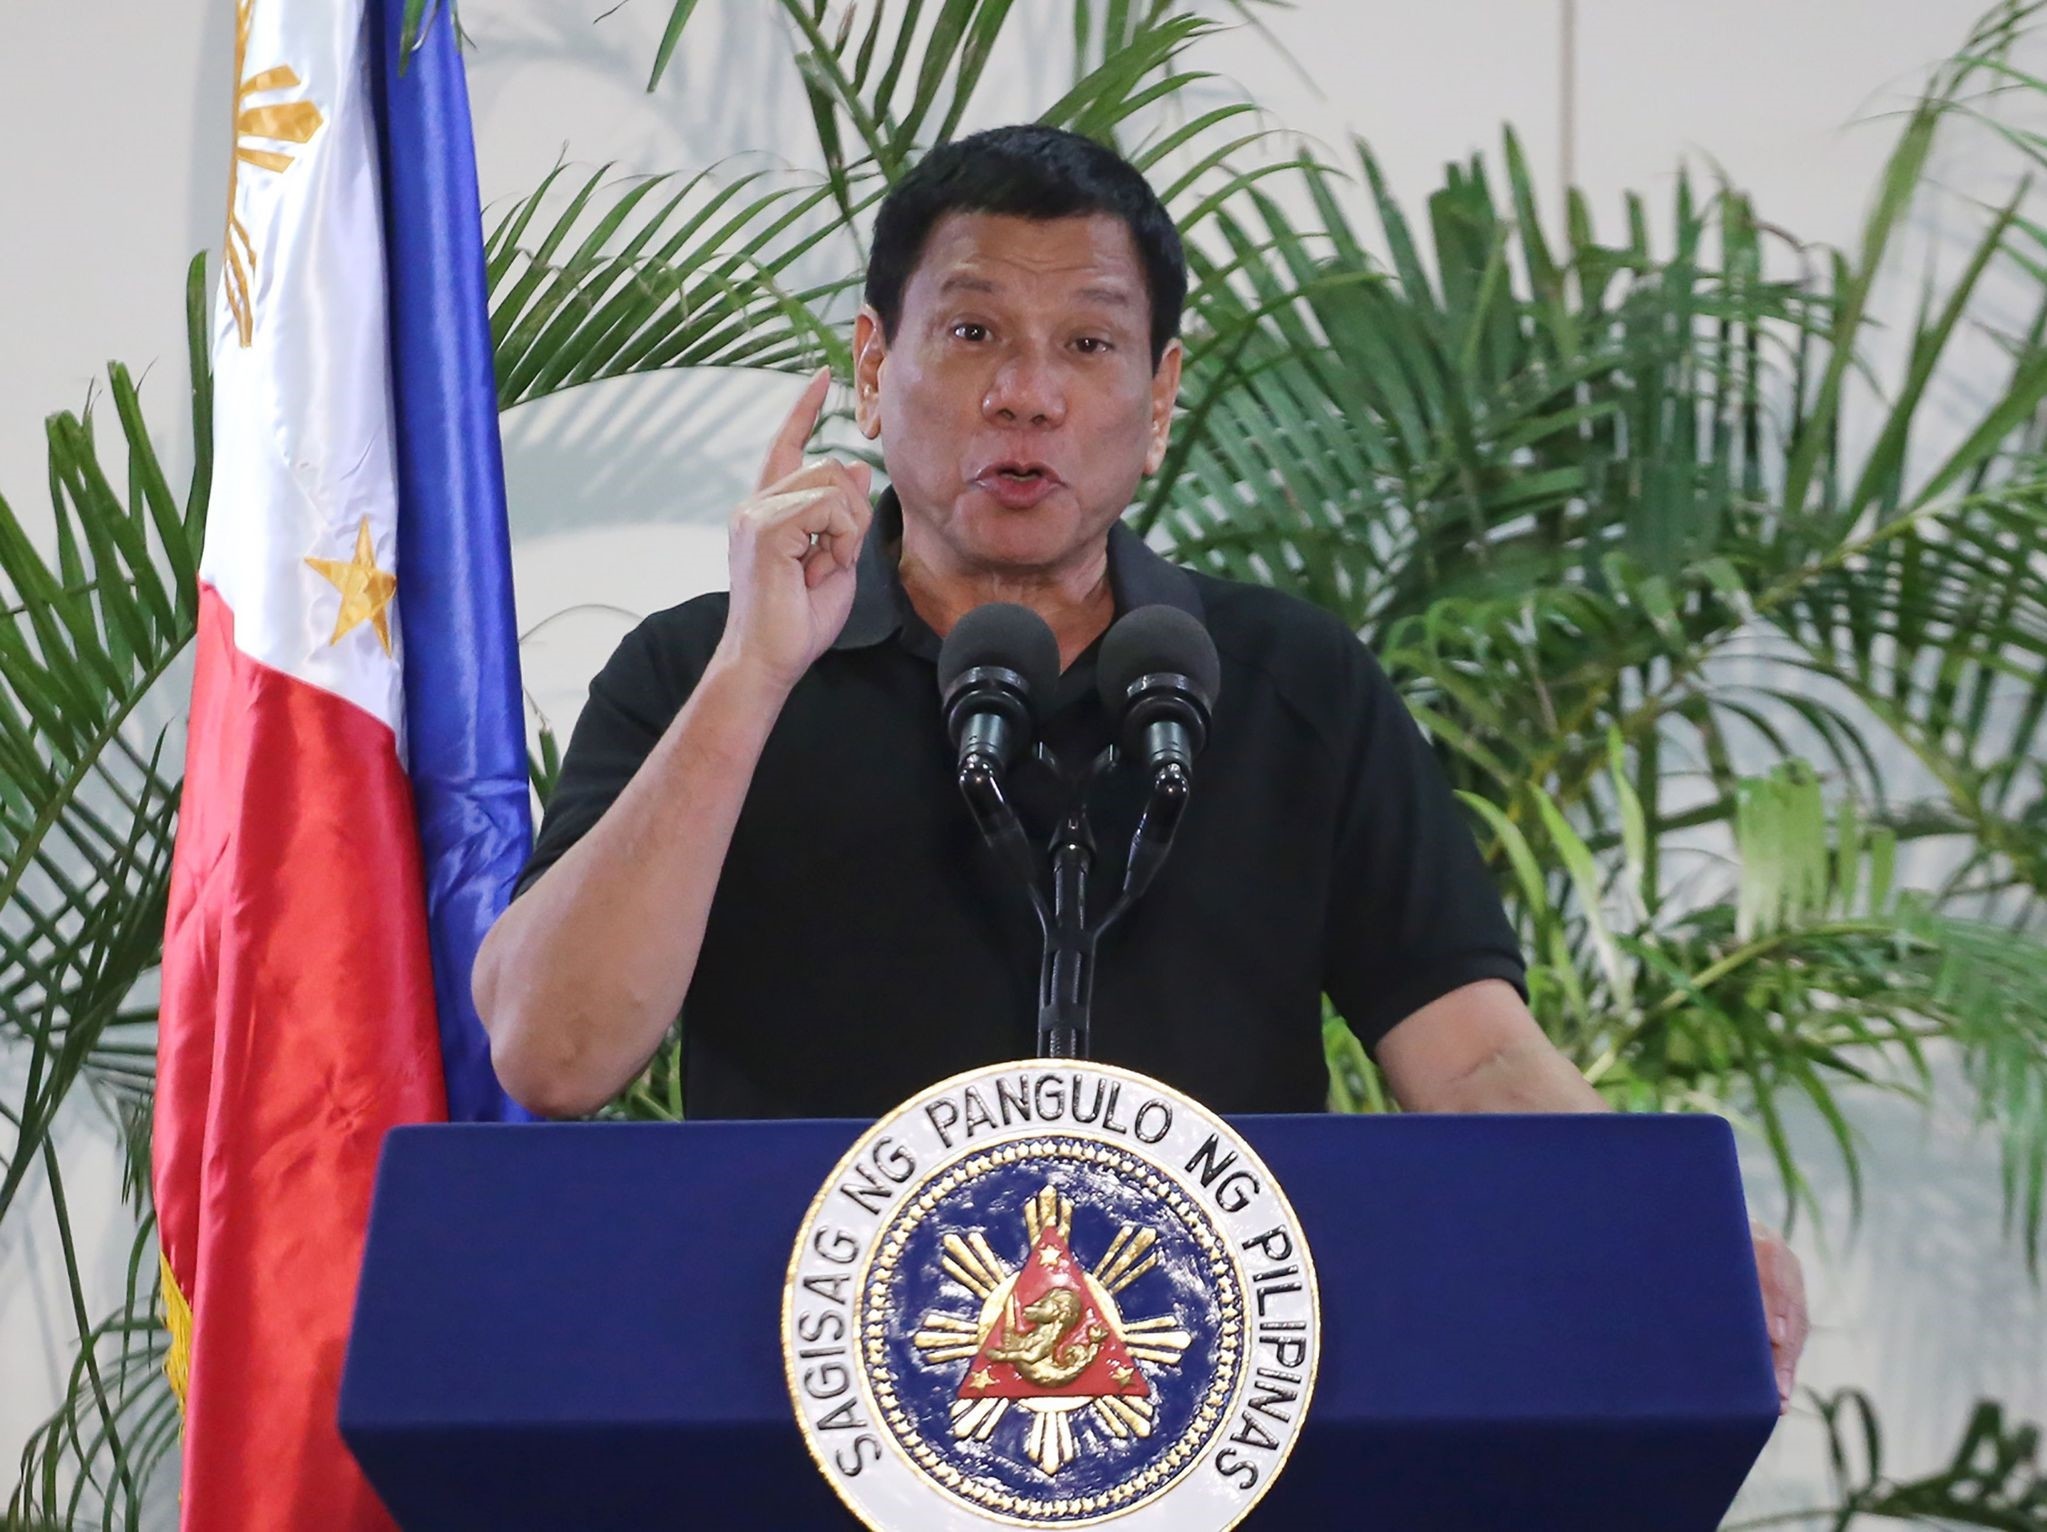 Philippines President Rodrigo Duterte delivers a speech at the Davao international airport terminal building early on September 30, 2016, shortly after arriving from an official visit to Vietnam. (AFP Photo)